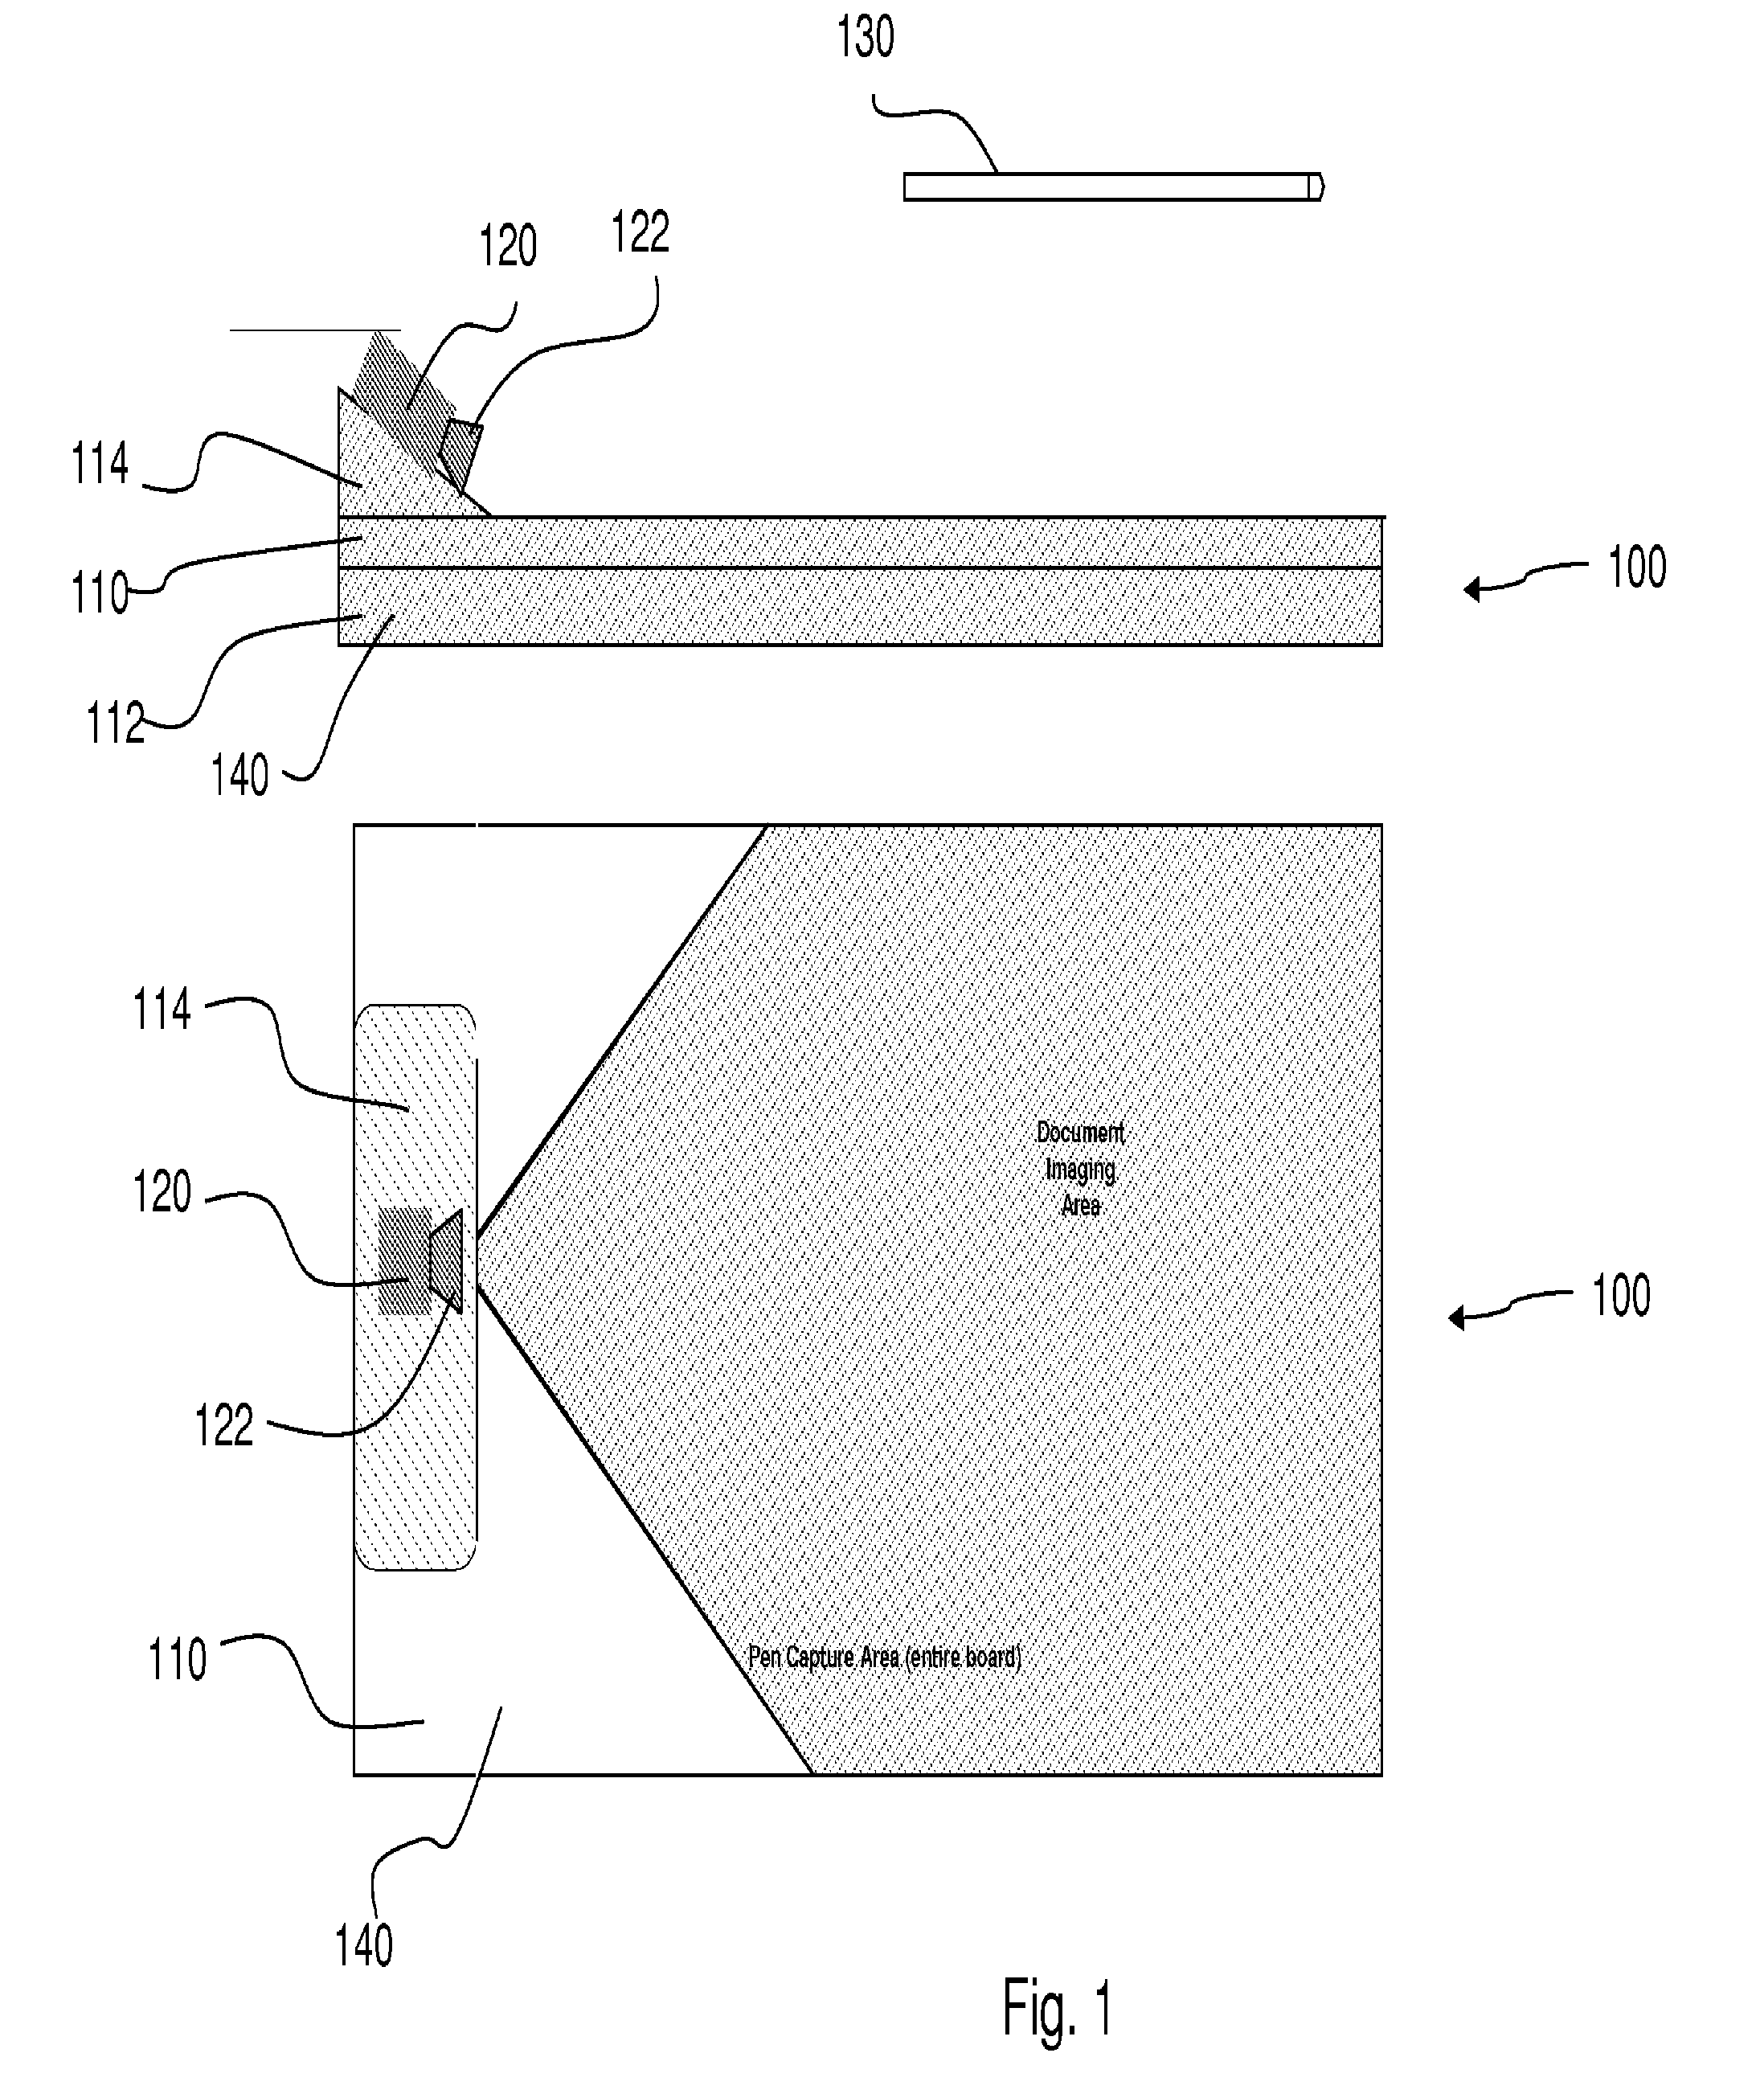 Camera-equipped writing tablet apparatus for digitizing form entries